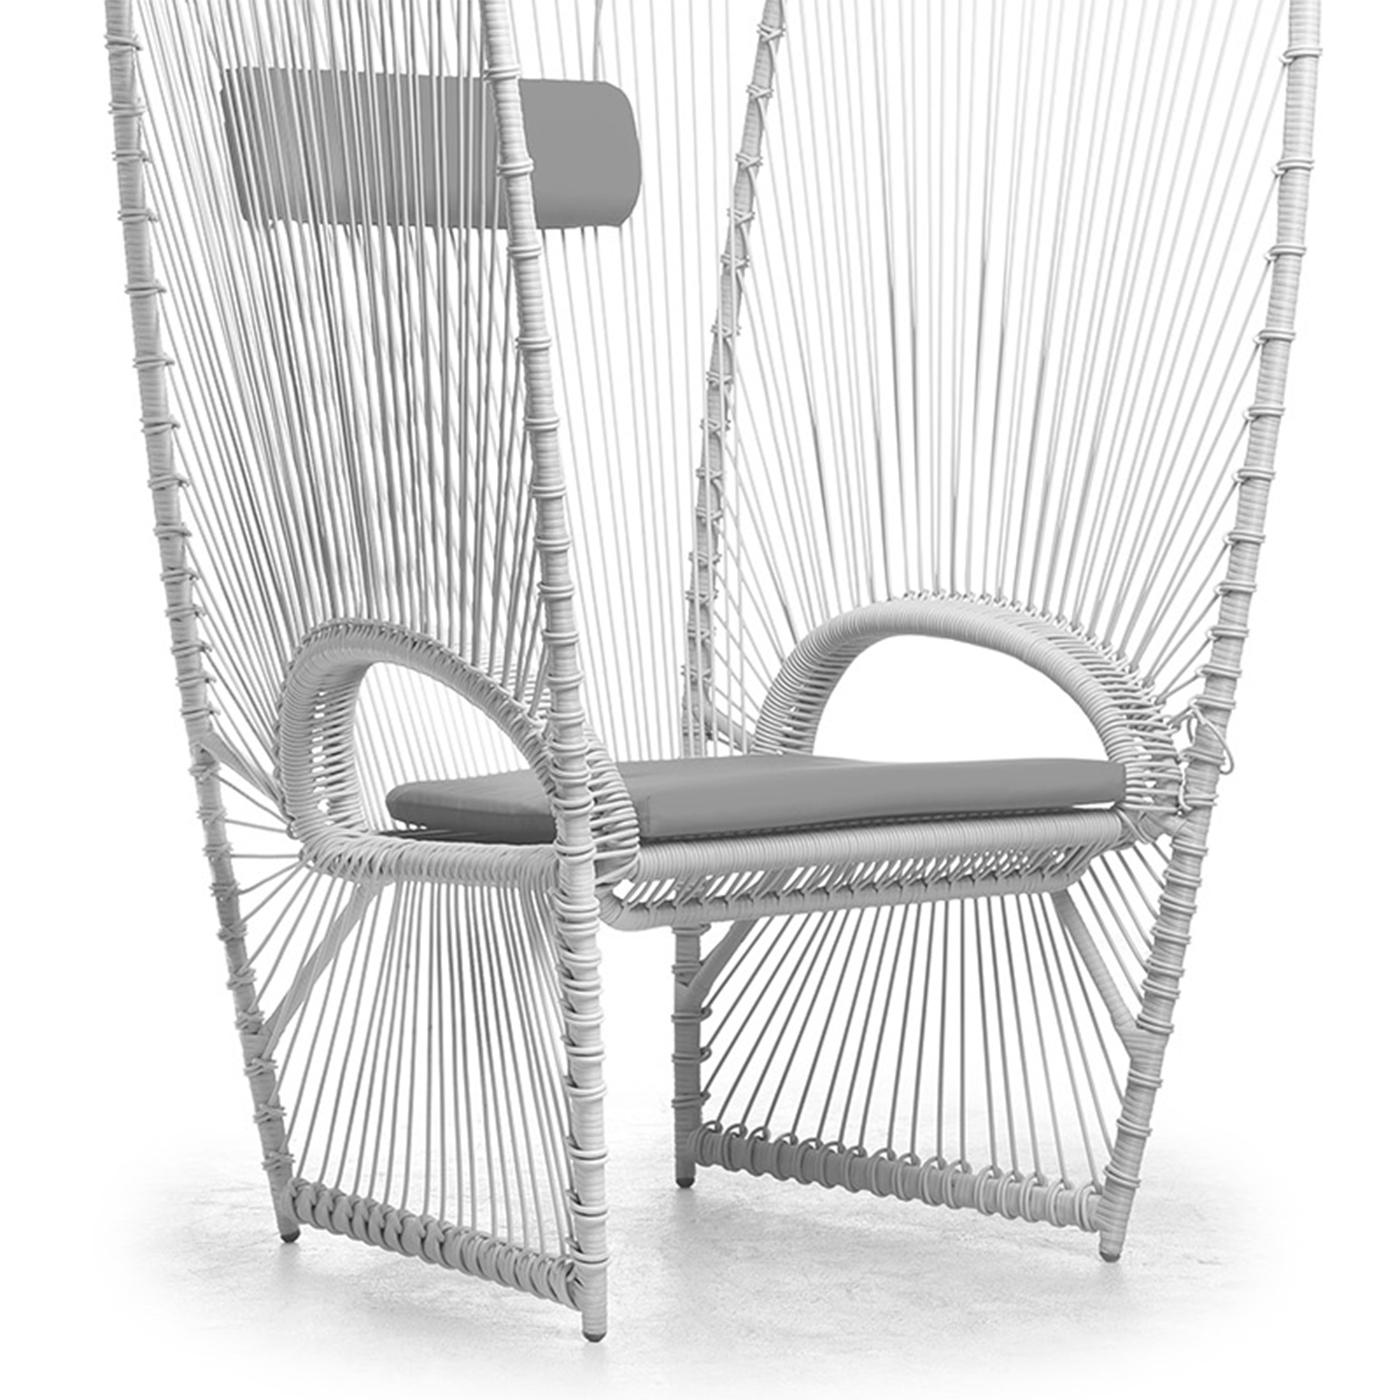 Philippine Butterfly Chair Indoor-Outddor For Sale